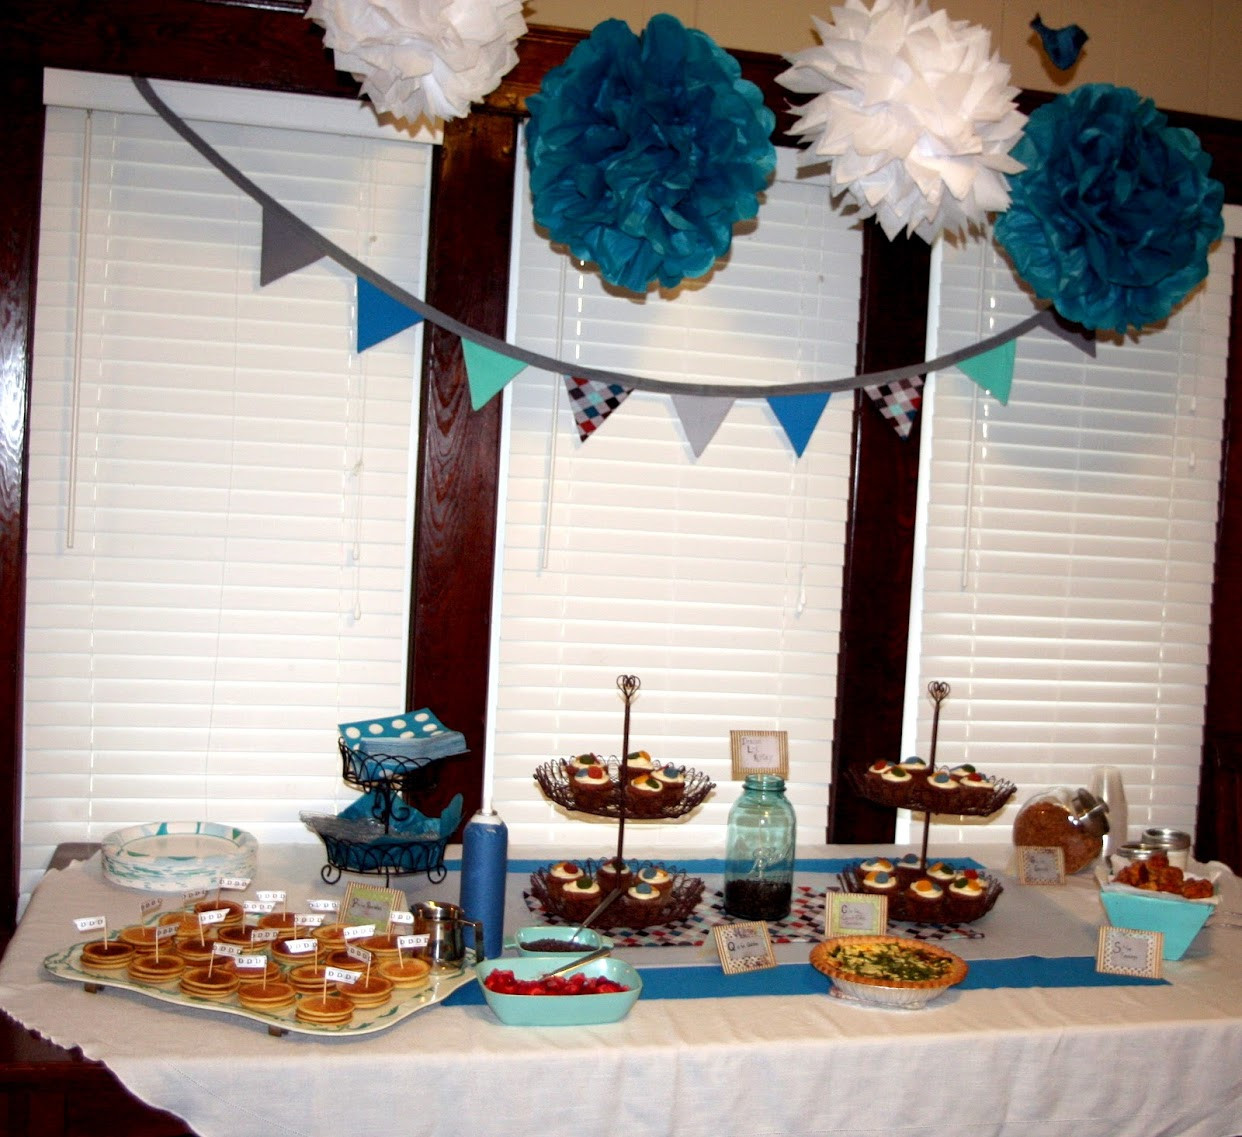 Baby Boy Baby Shower Decor
 Baby Shower Decorations For Boys Ideas